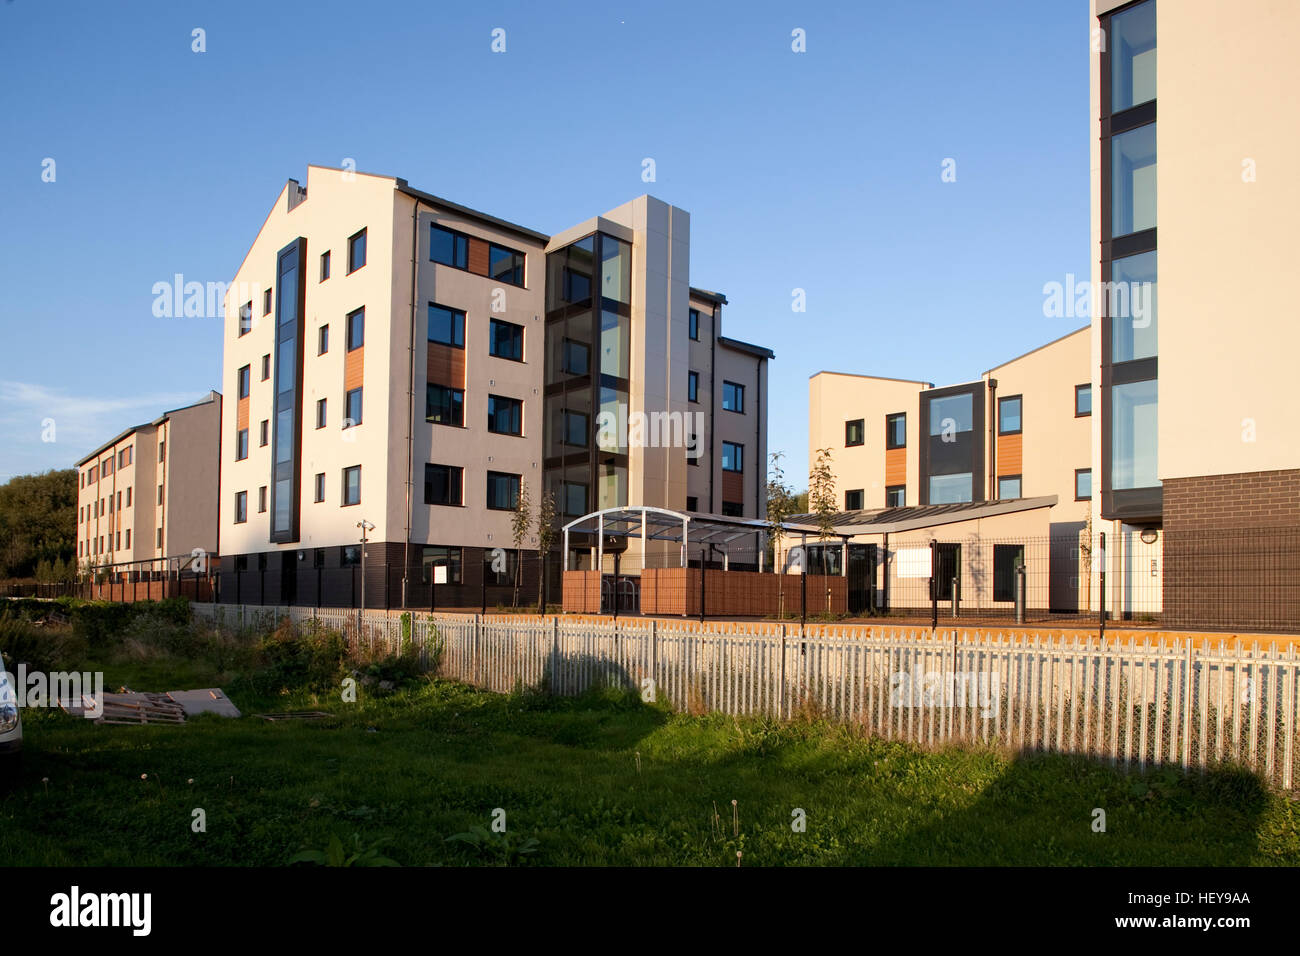 Castle Mill Student Accommodation Oxford Stock Photo